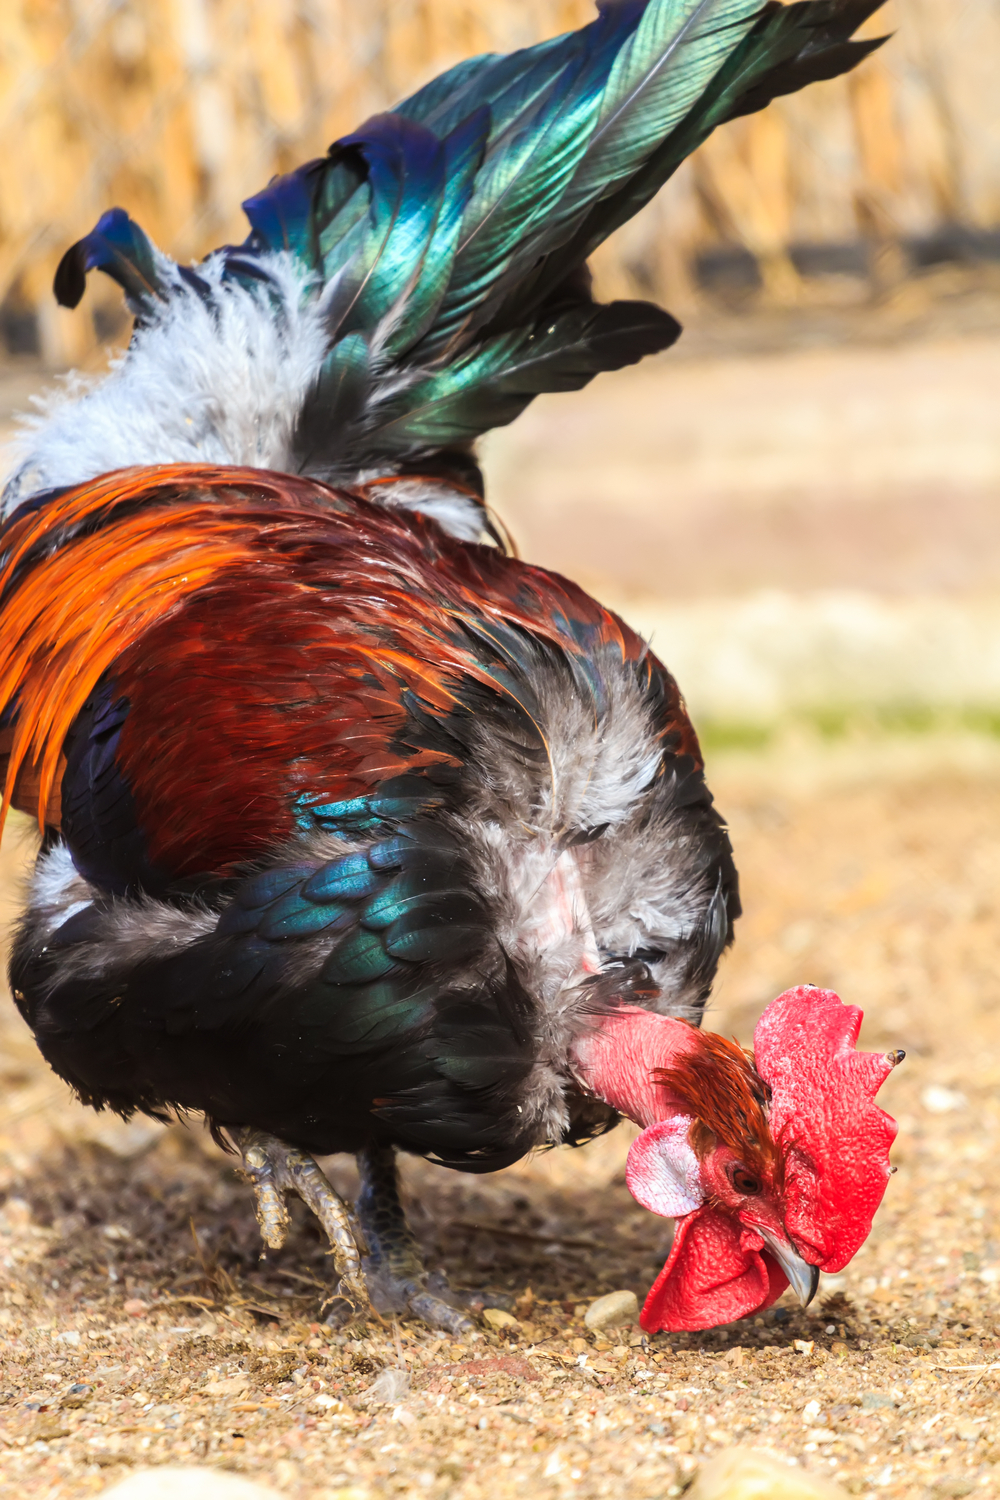 What Do Roosters Like to Eat Most